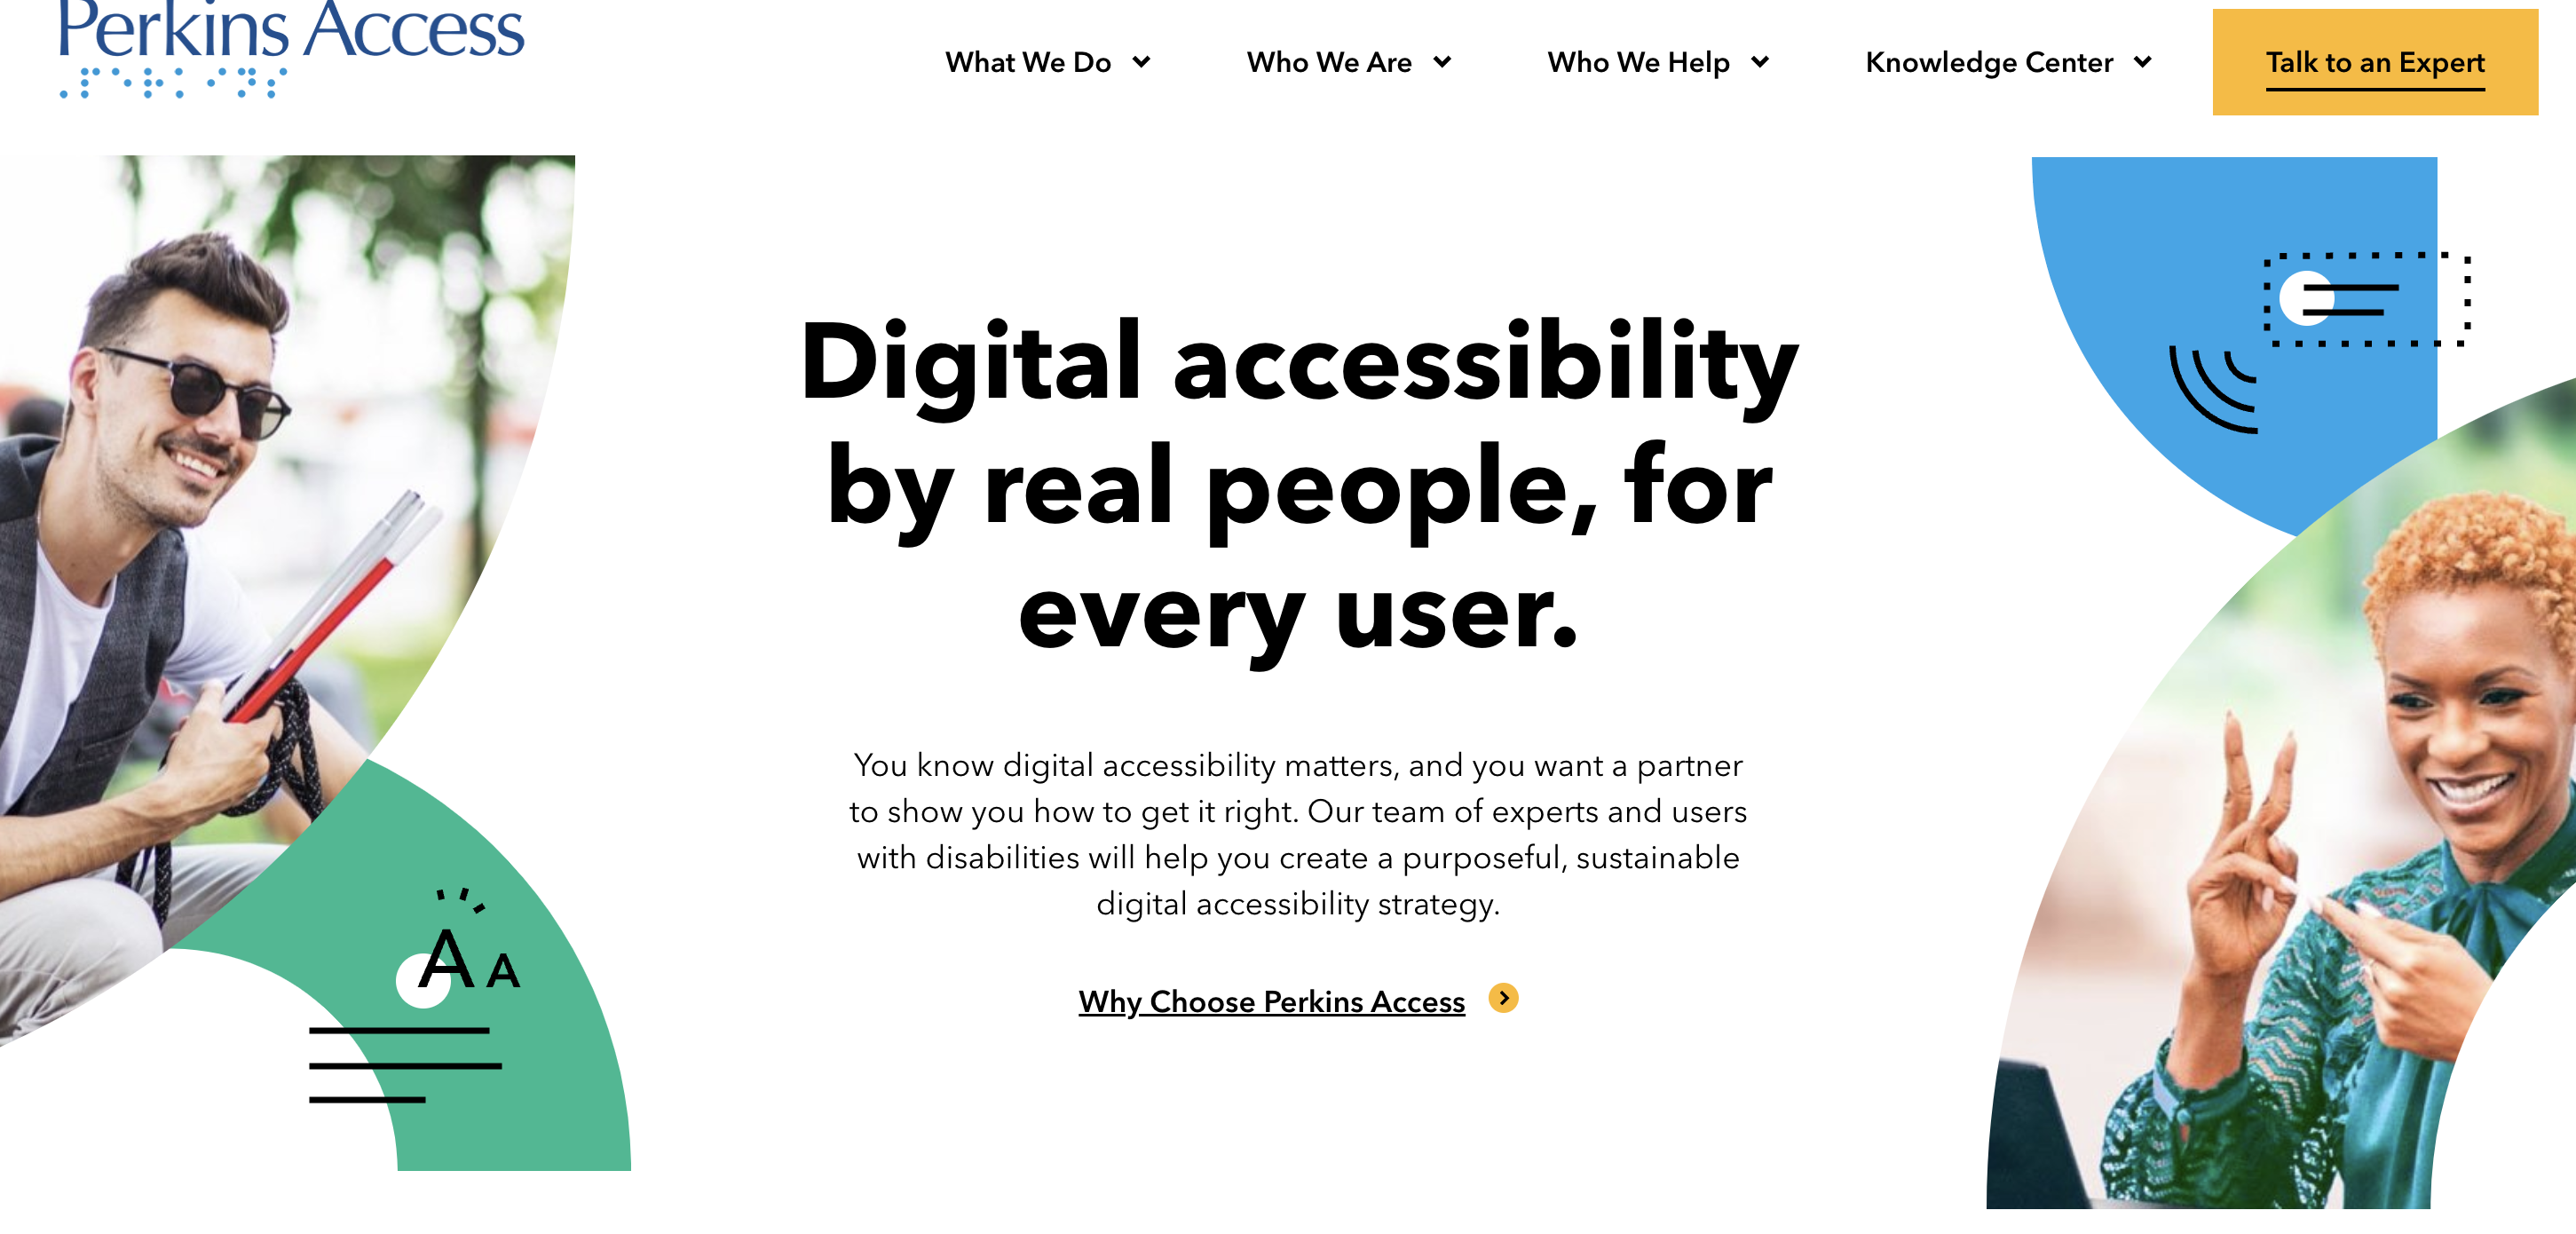 Perkins Access offers for-pay website accessibility testing that includes both automated evaluations and assessments carried out by technology experts and users with disabilities